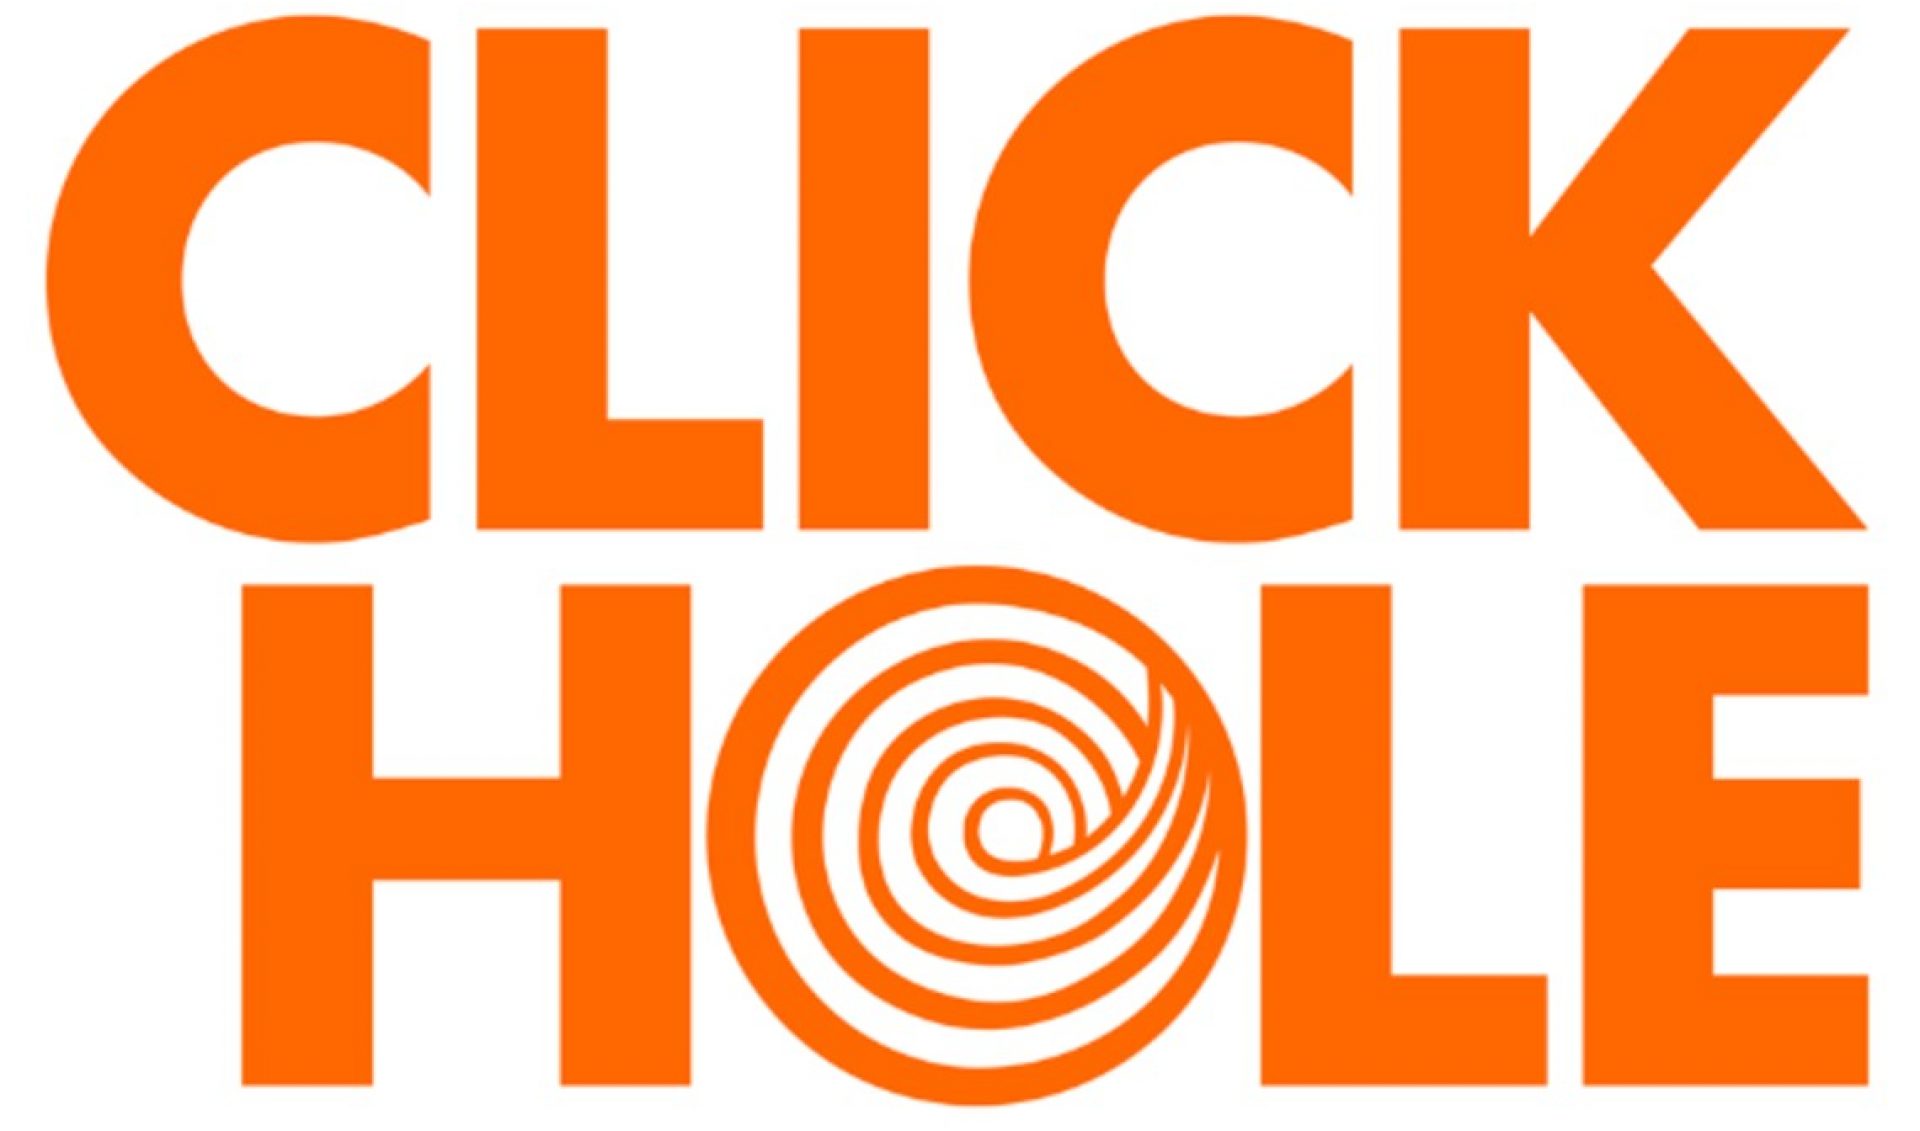 Cards Against Humanity Acquires ClickHole, Names Employees Majority Owners